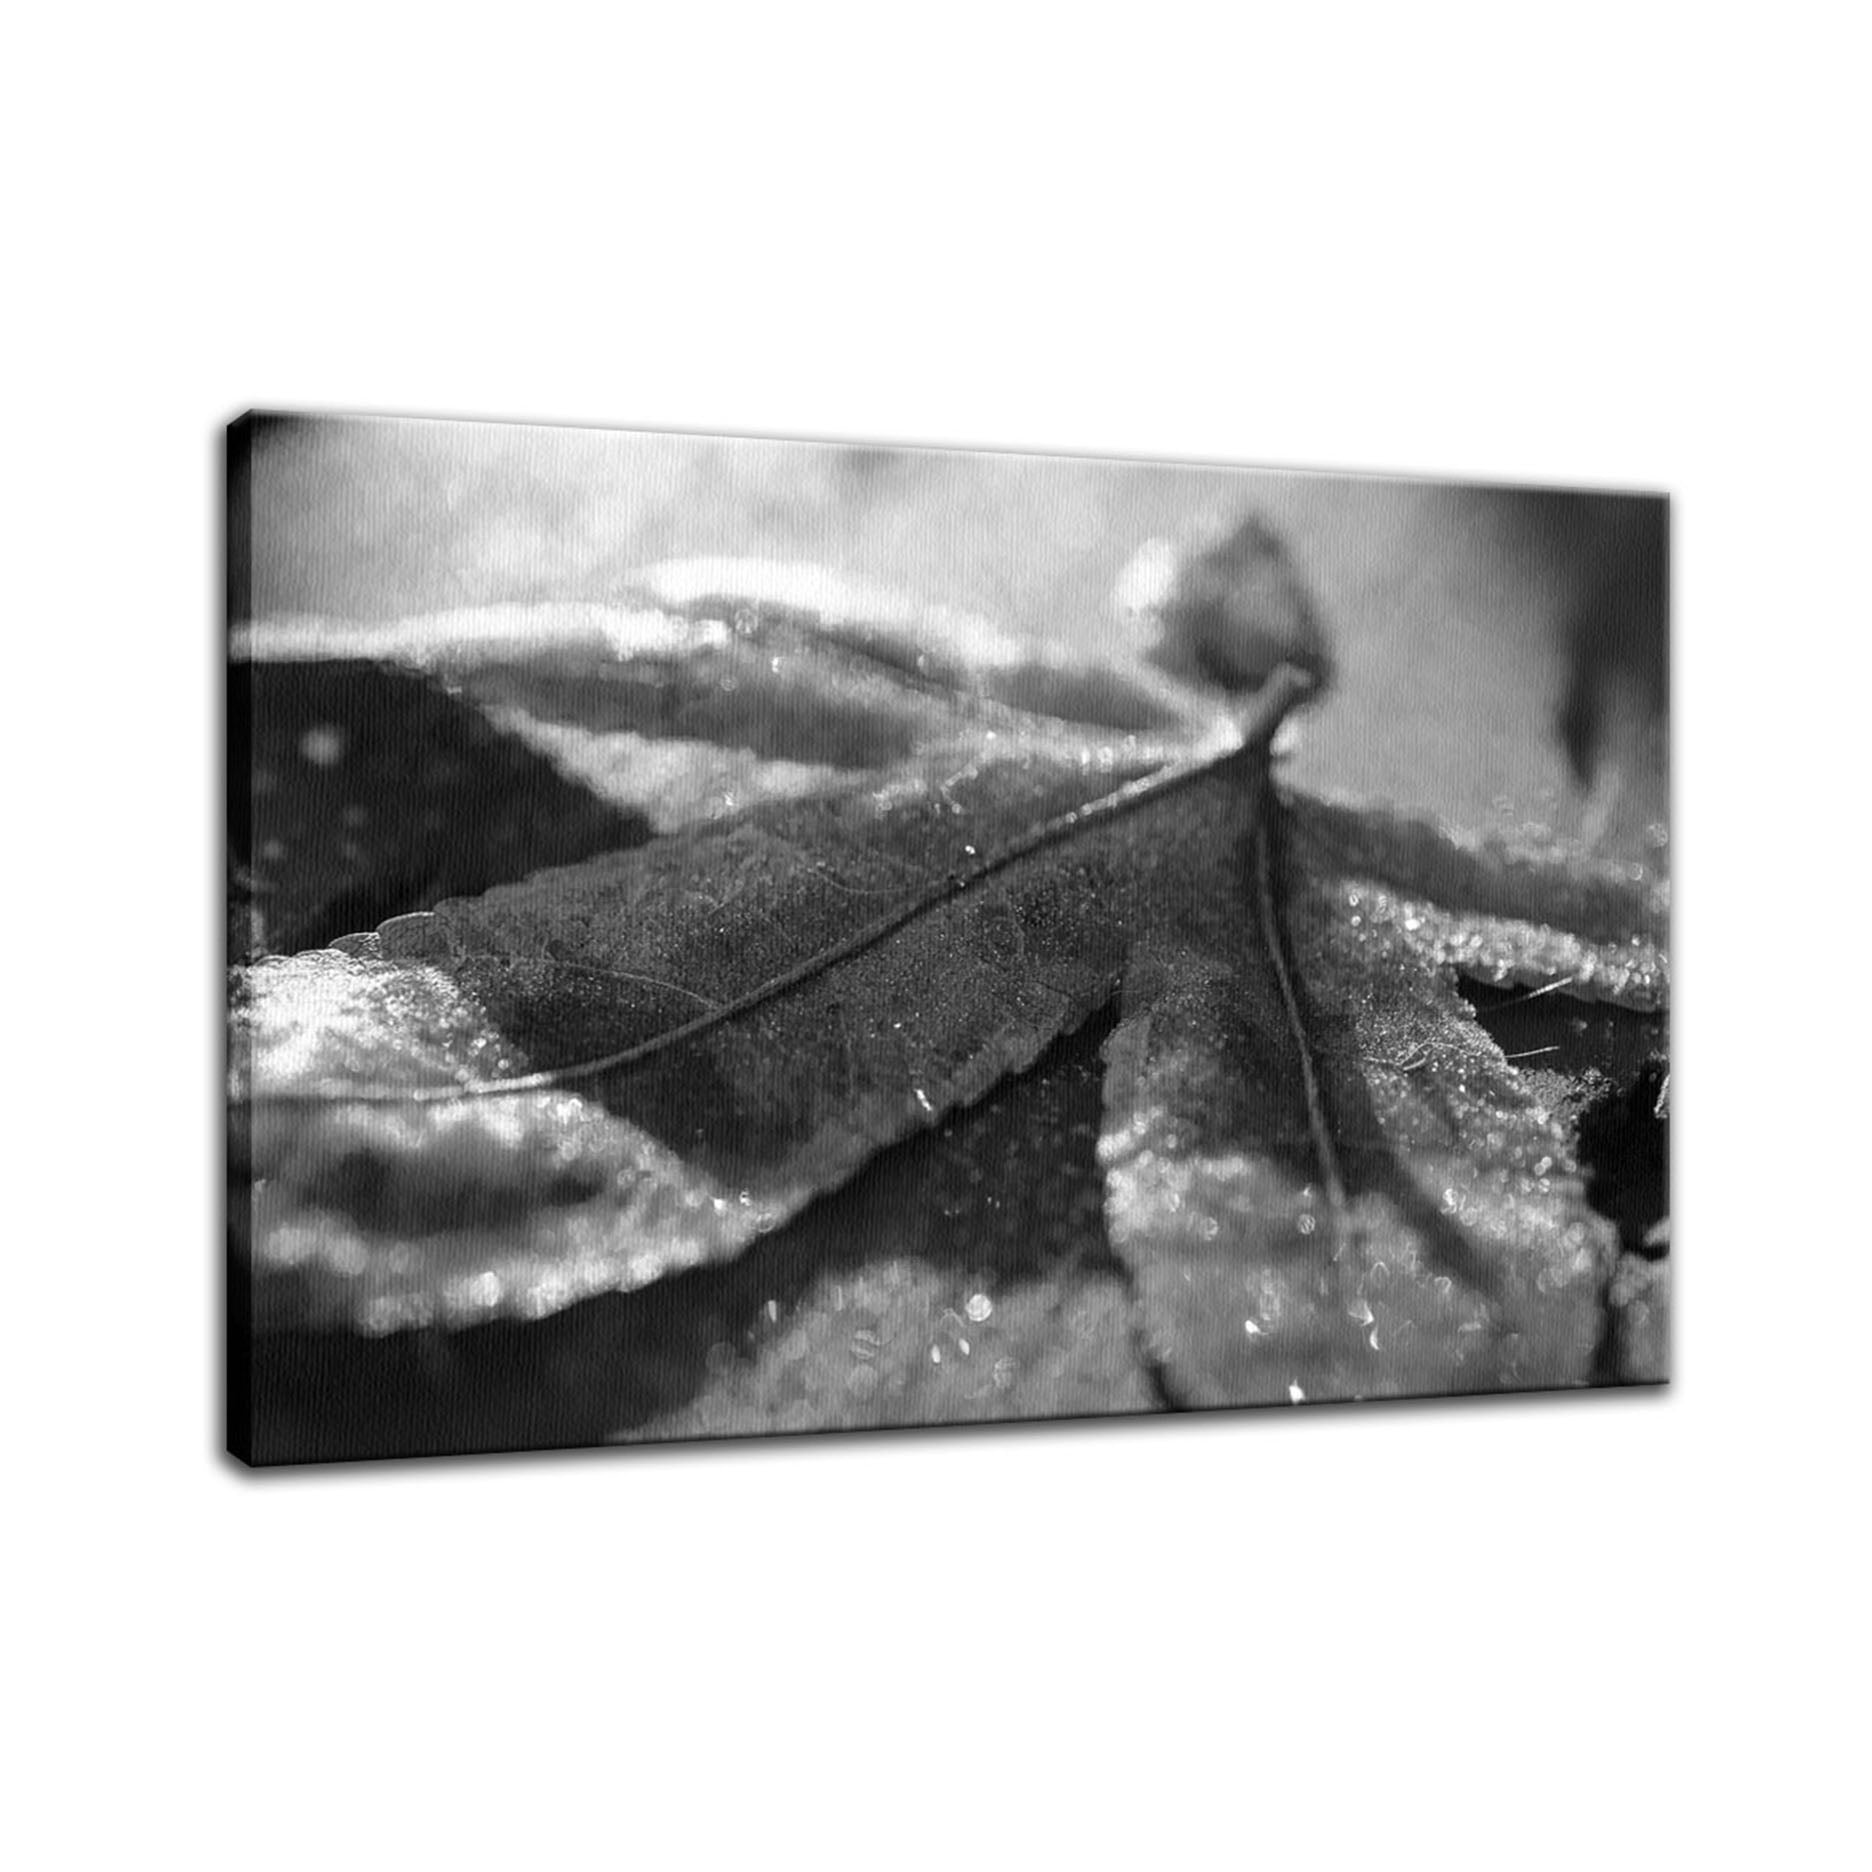 Frost Covered Leaf Botanical / Nature Photo Fine Art Canvas Wall Art Prints  - PIPAFINEART